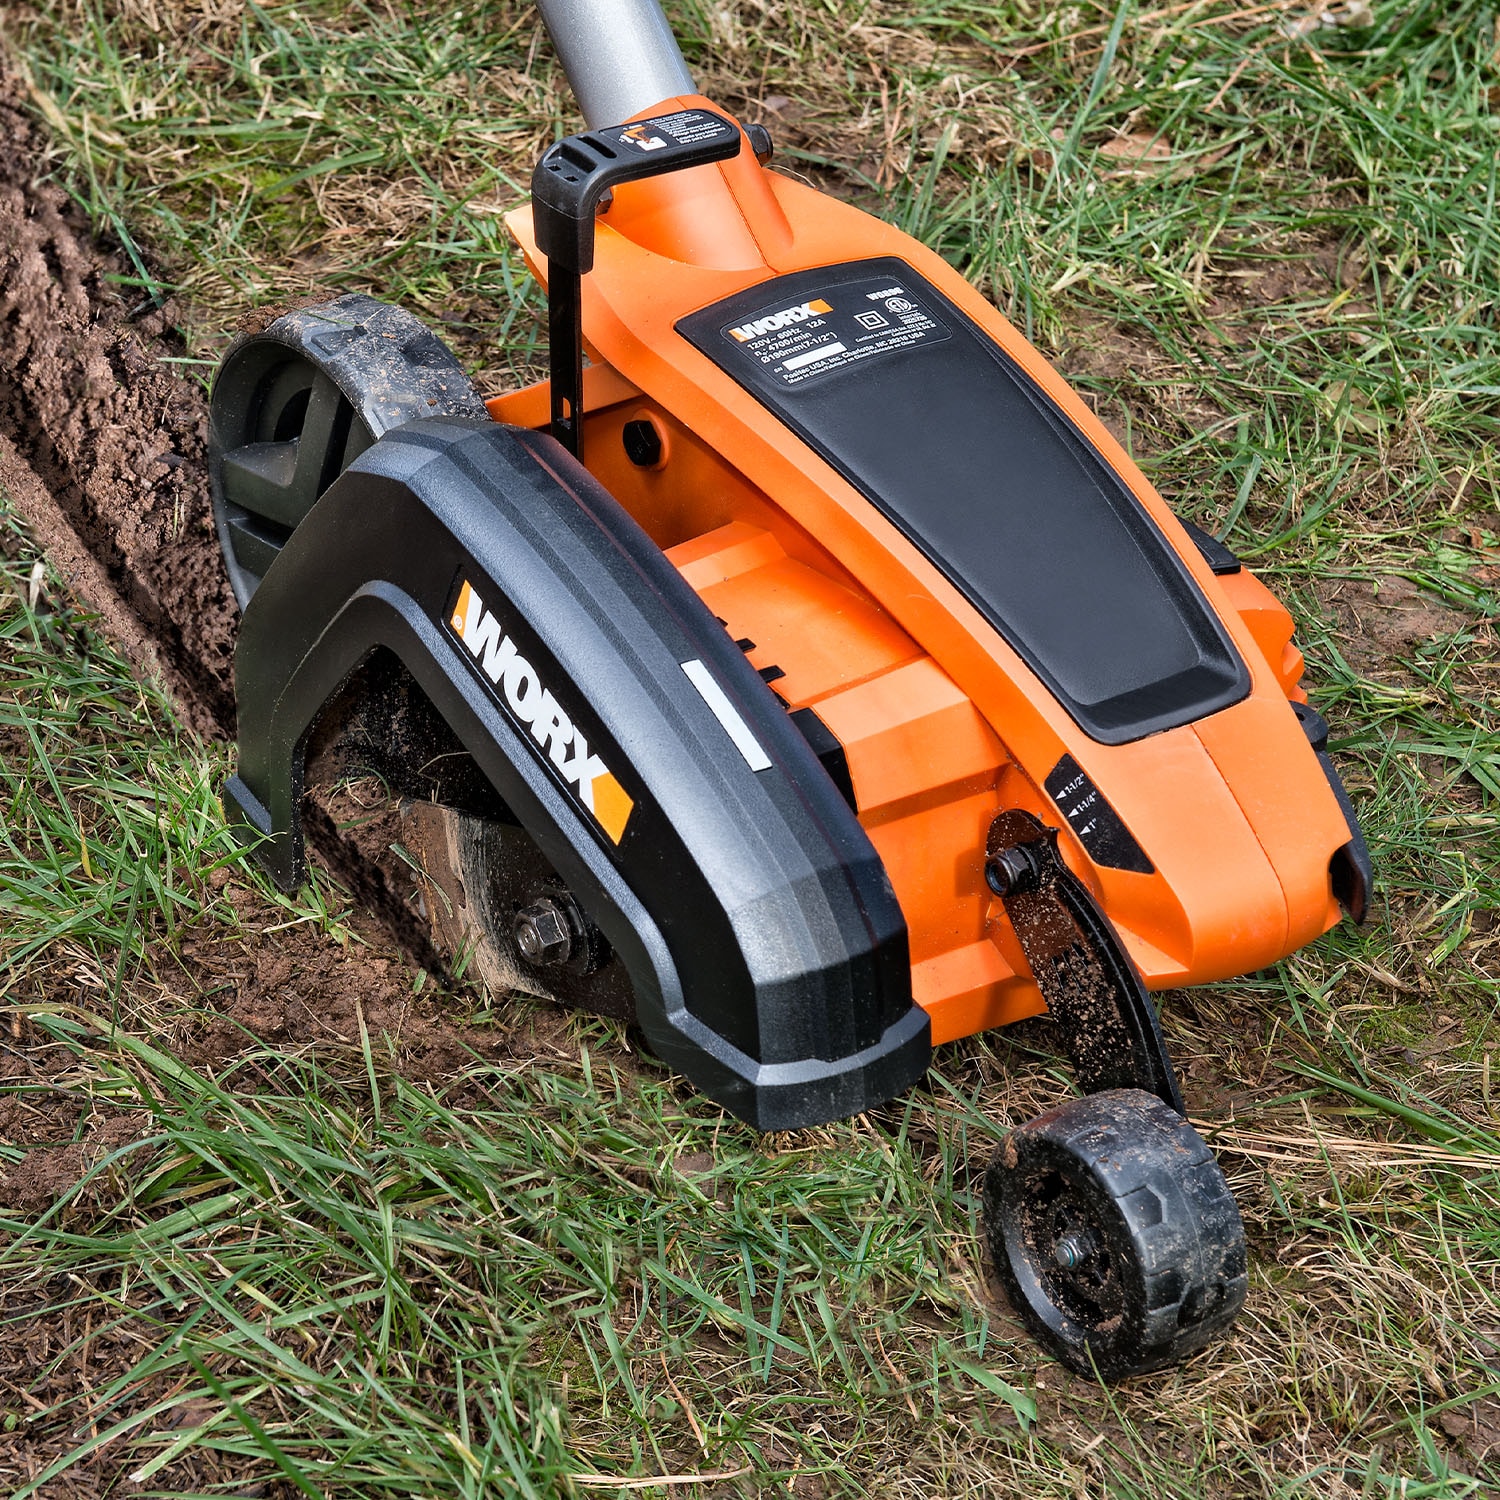 Black & Decker LE750 7.5 in. 12-Amp Corded Electric 2-in-1 Landscape Edger/Trencher  